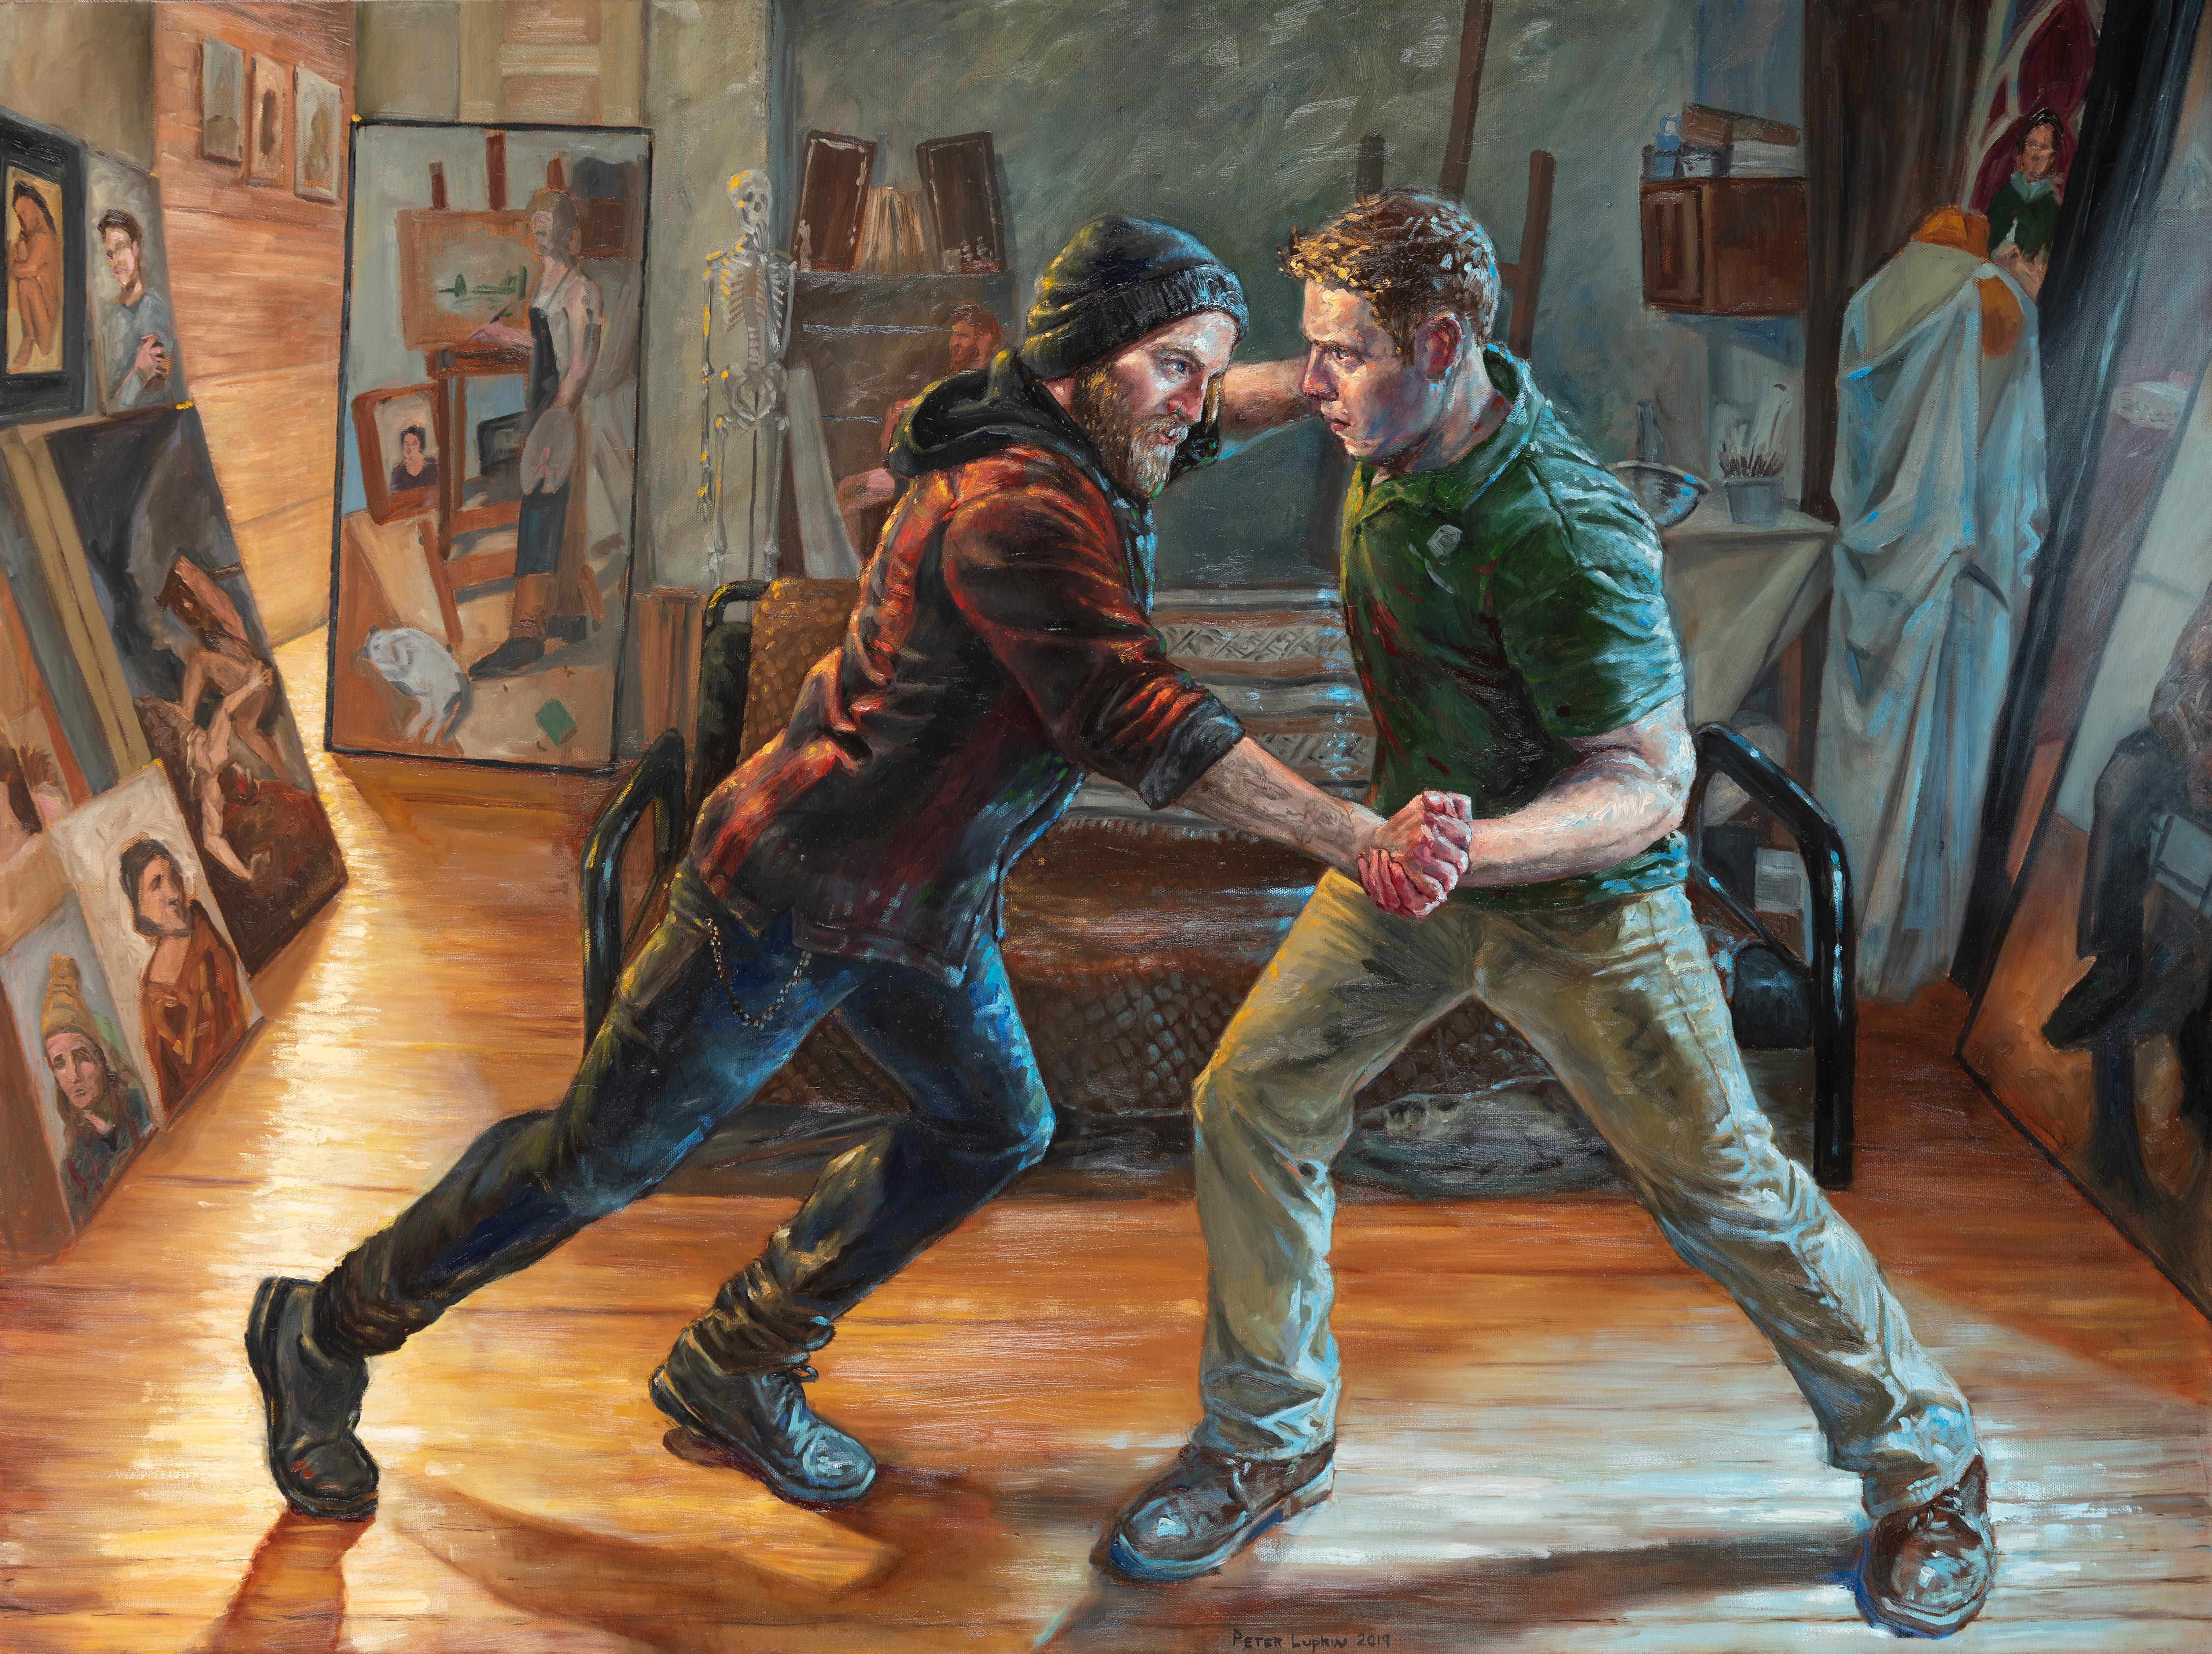 Push - Original Oil Painting of Two Males Sparring in an Artist Studio Space